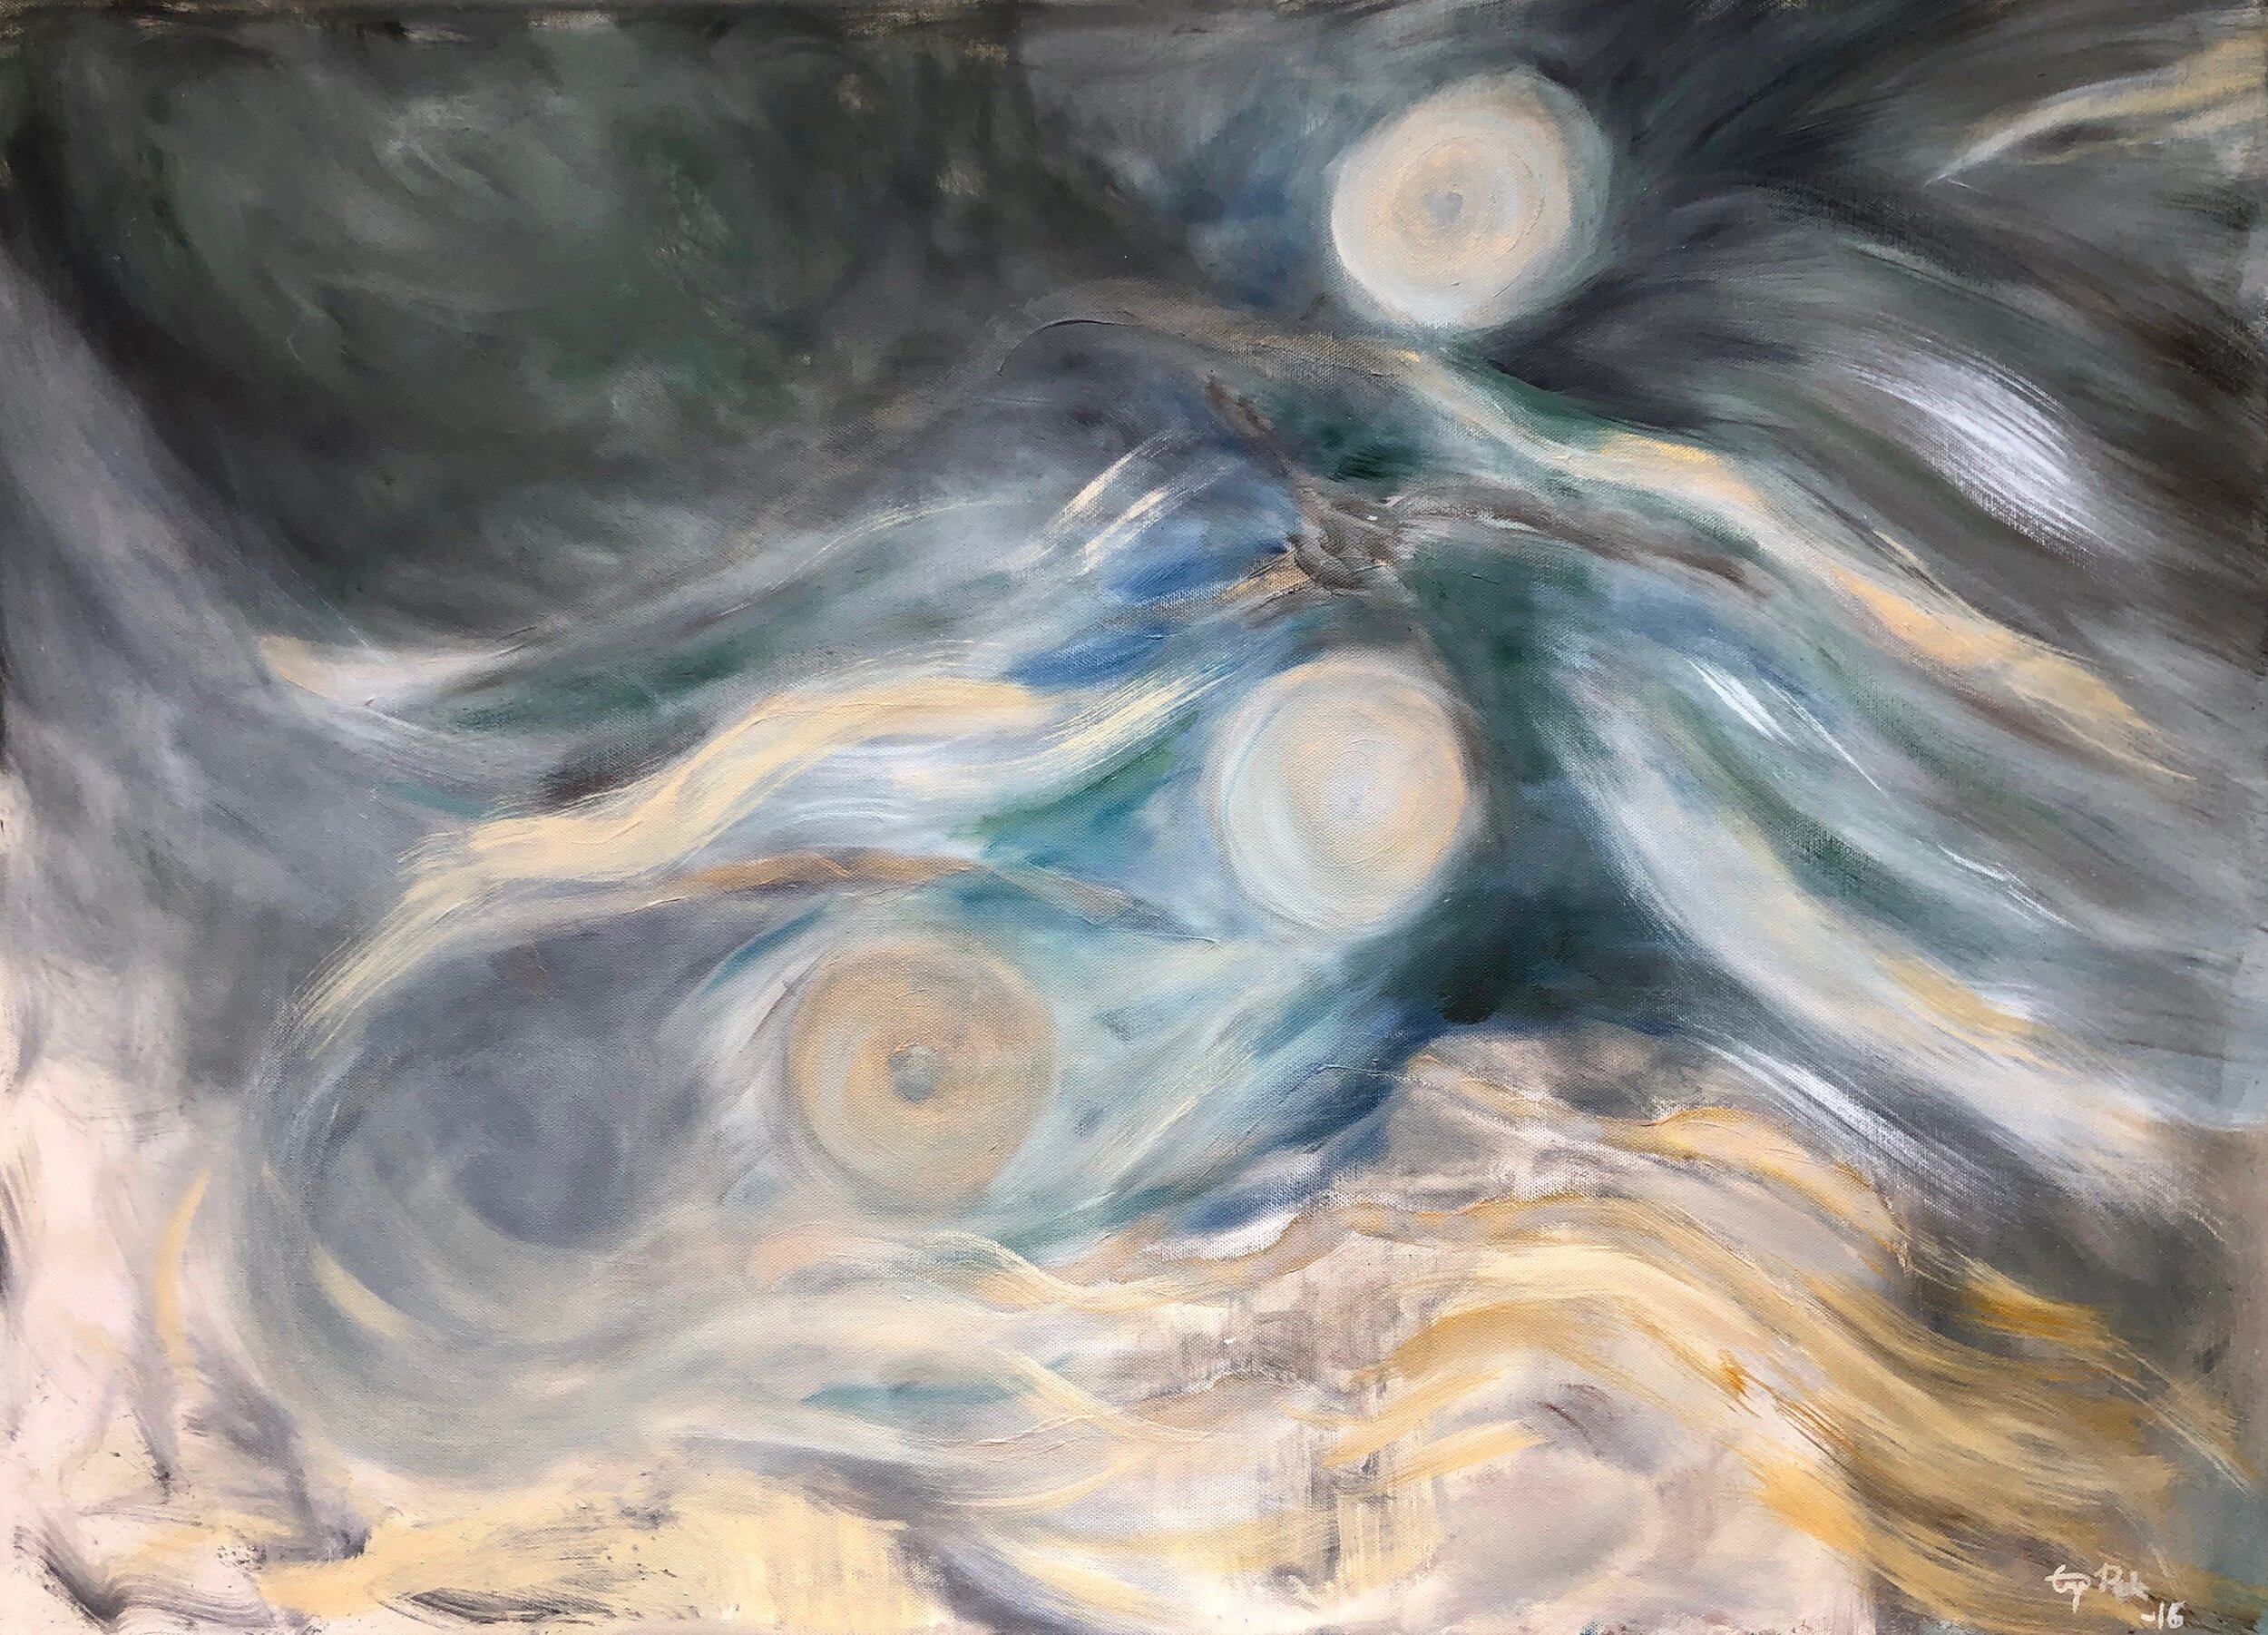  CALL OF THE MOON, 2015-16, oil on canvas, 65x90cm 